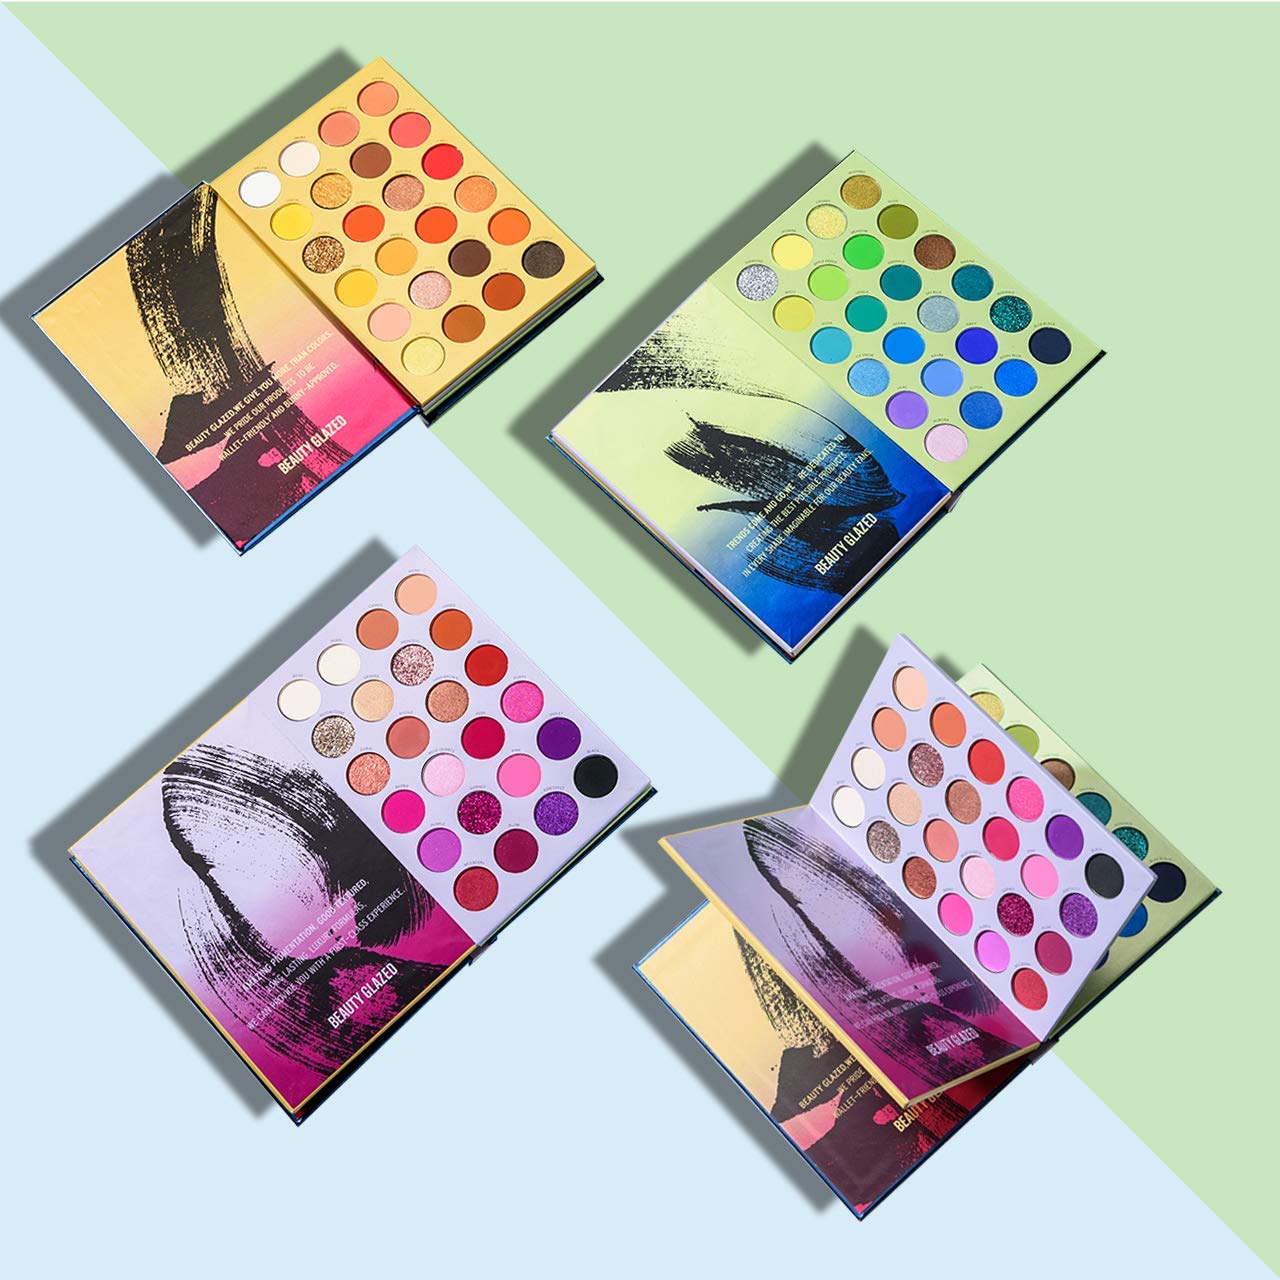  MYUANGO Eyeshadow Makeup Palette All In One Makeup Set 3 Layers Pigmented 72 Colors Color Shades Palette Make Up Eye Shadow Waterproof Long Lasting Pallet